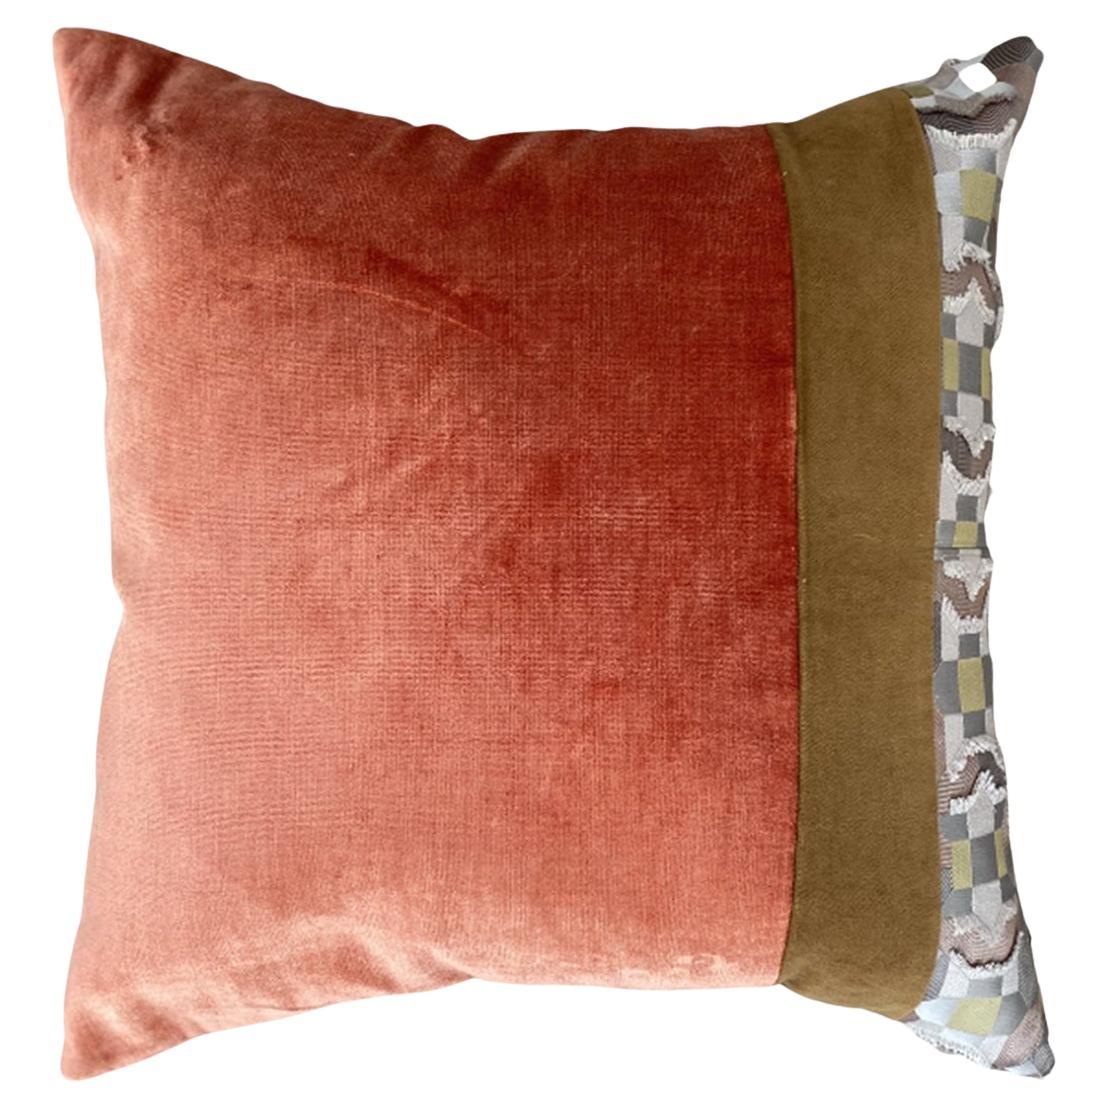 Tangerine Velvet with Saddle Brown Velvet Accent and Grey Silk Feature Fabric